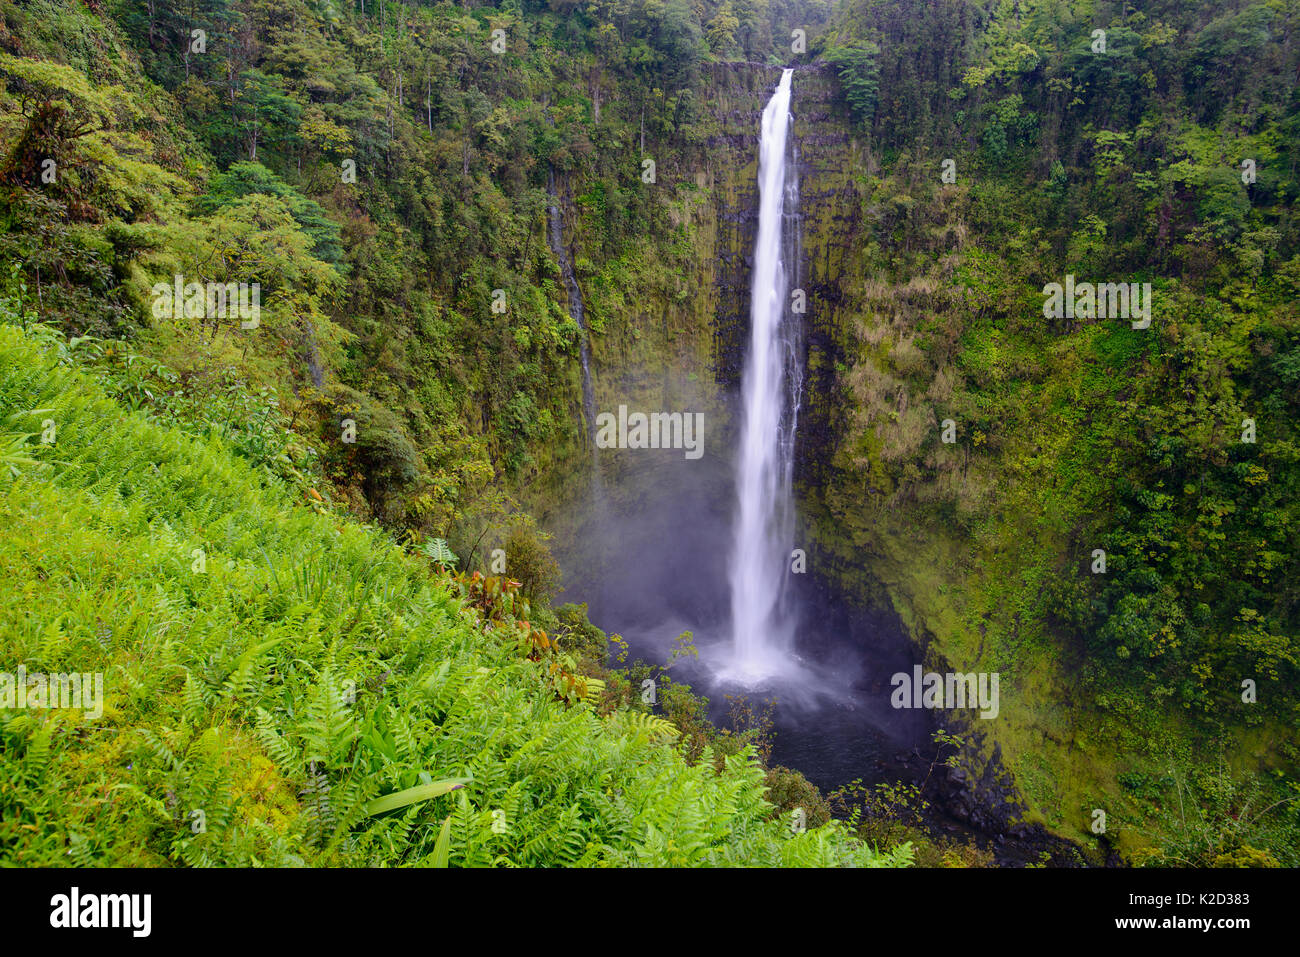 Akaka falls (422 foot) surrounded by vegetation, (much of which is non-native) Akaka Falls State Park, Hawaii. Stock Photo